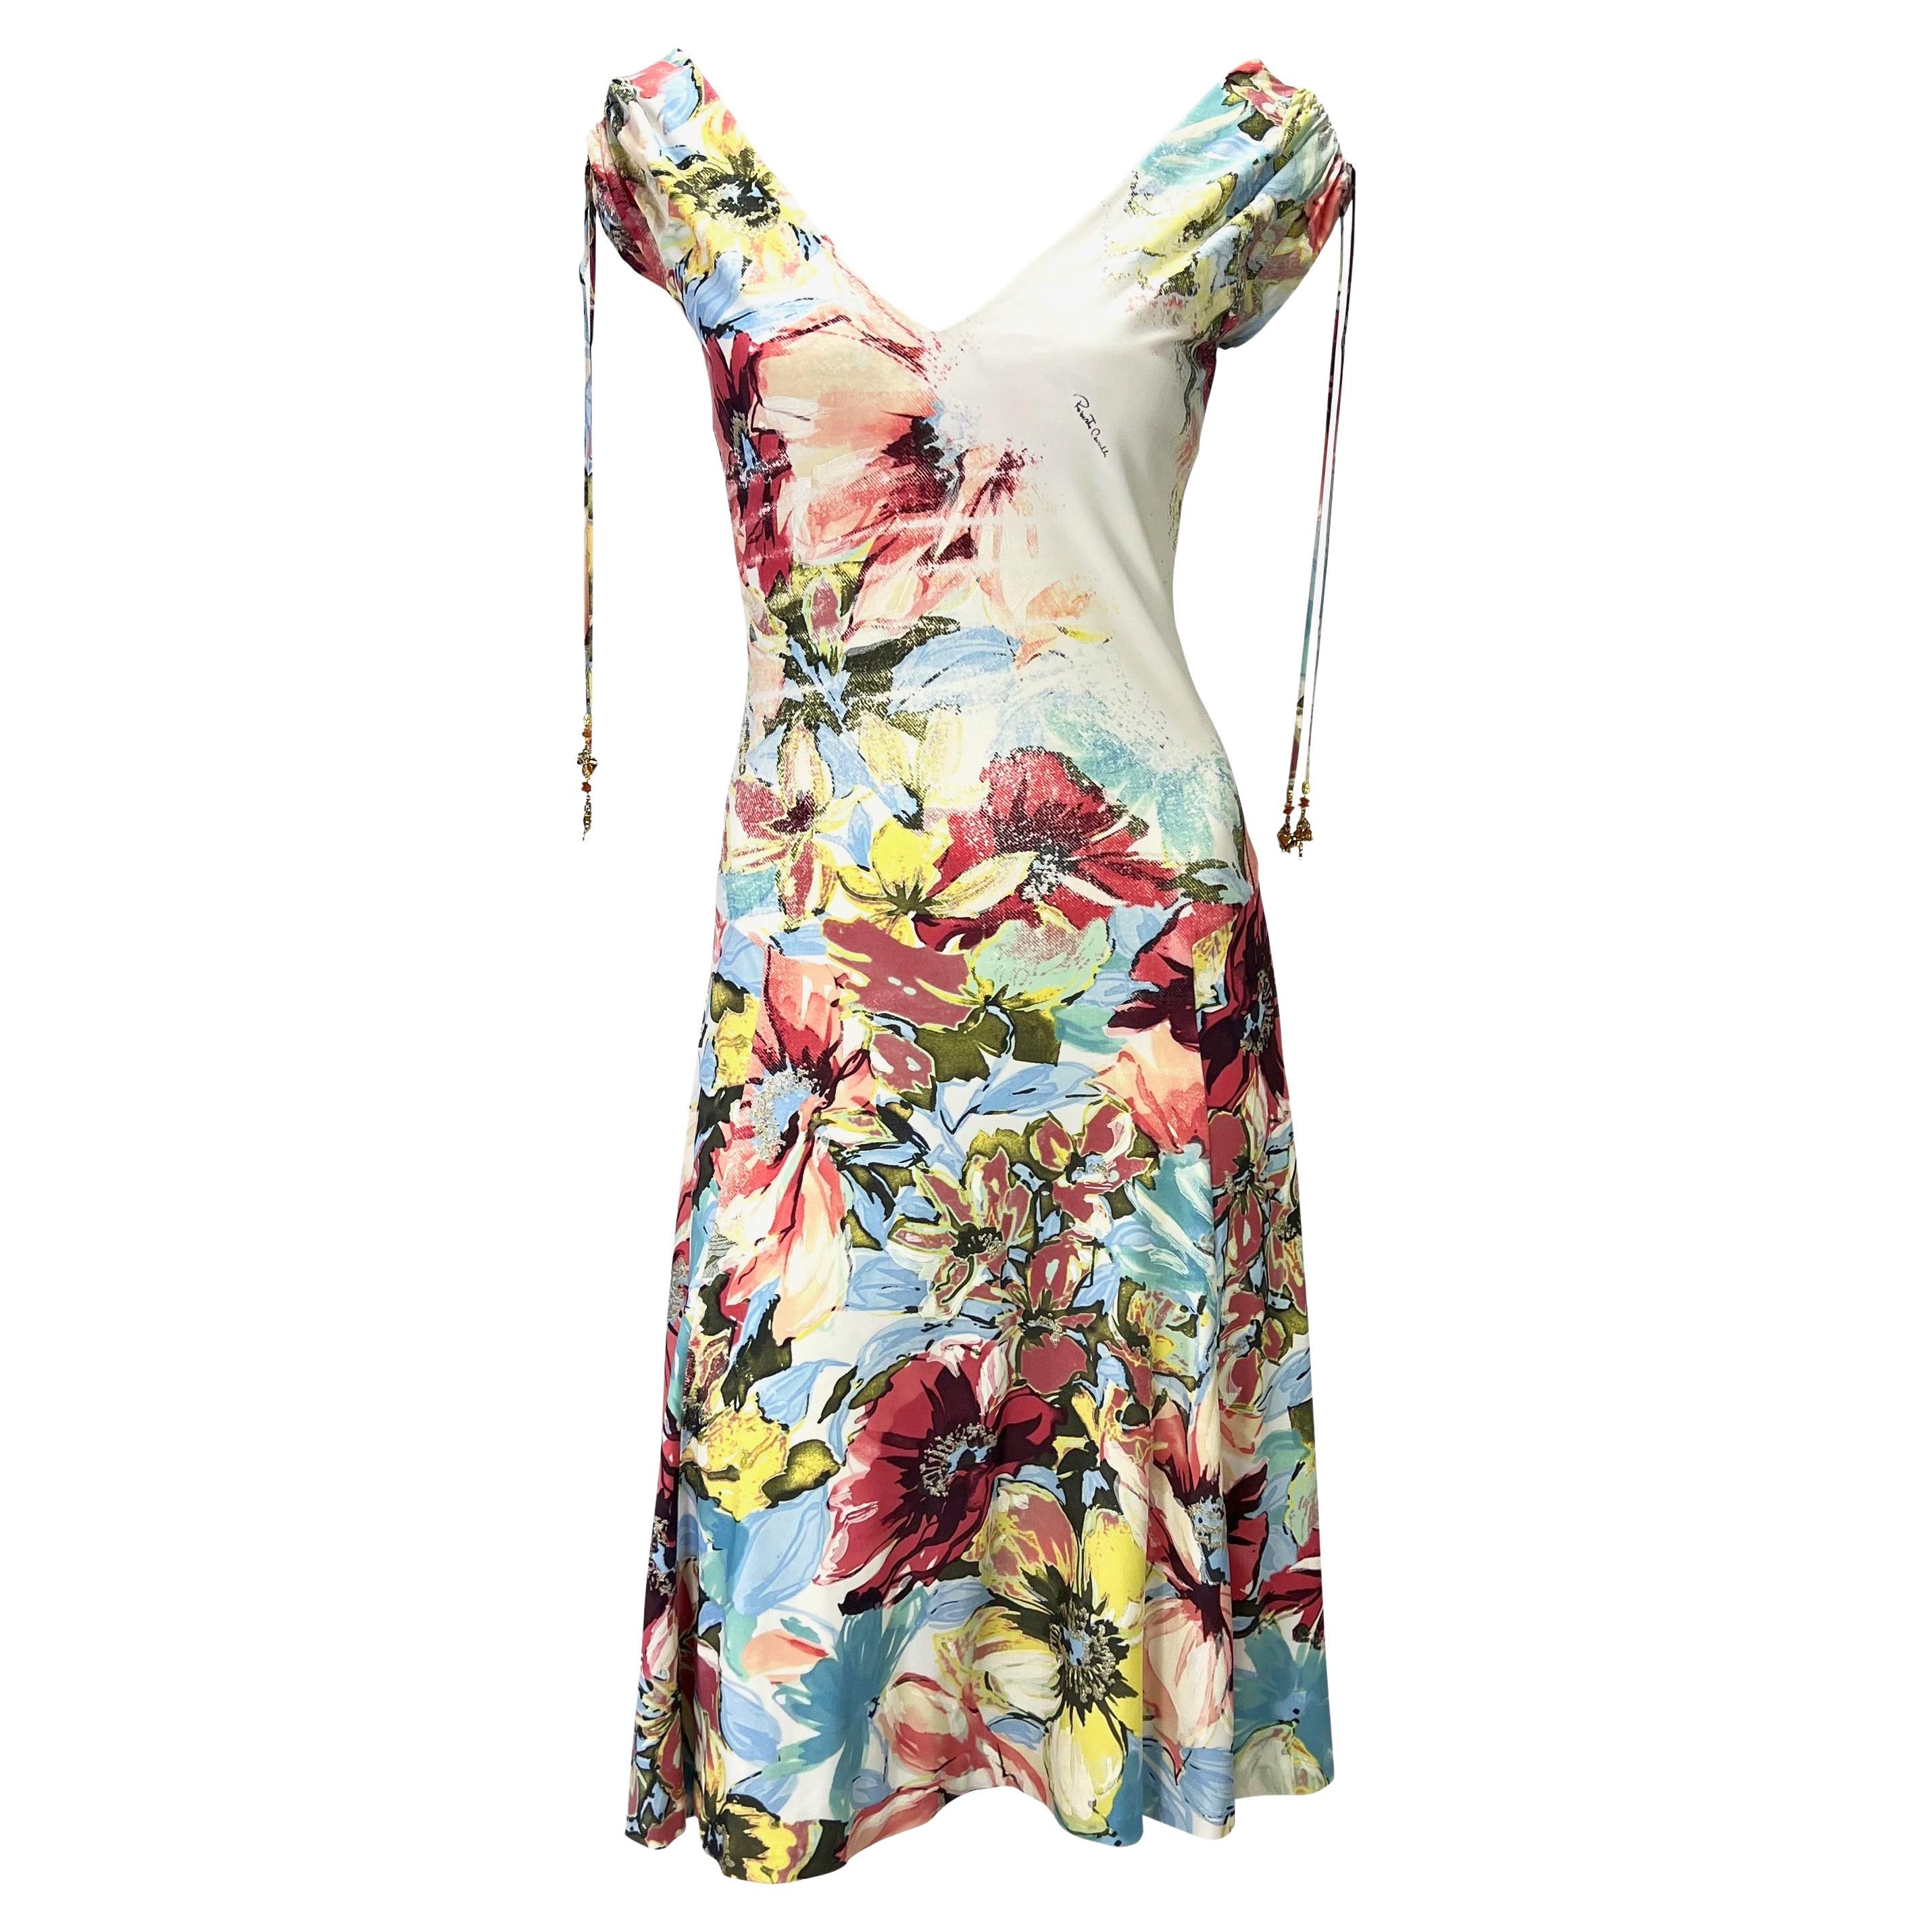 S/S 2003 Roberto Cavalli Floral Abstract Watercolor Viscose Stretch Charm Dress For Sale